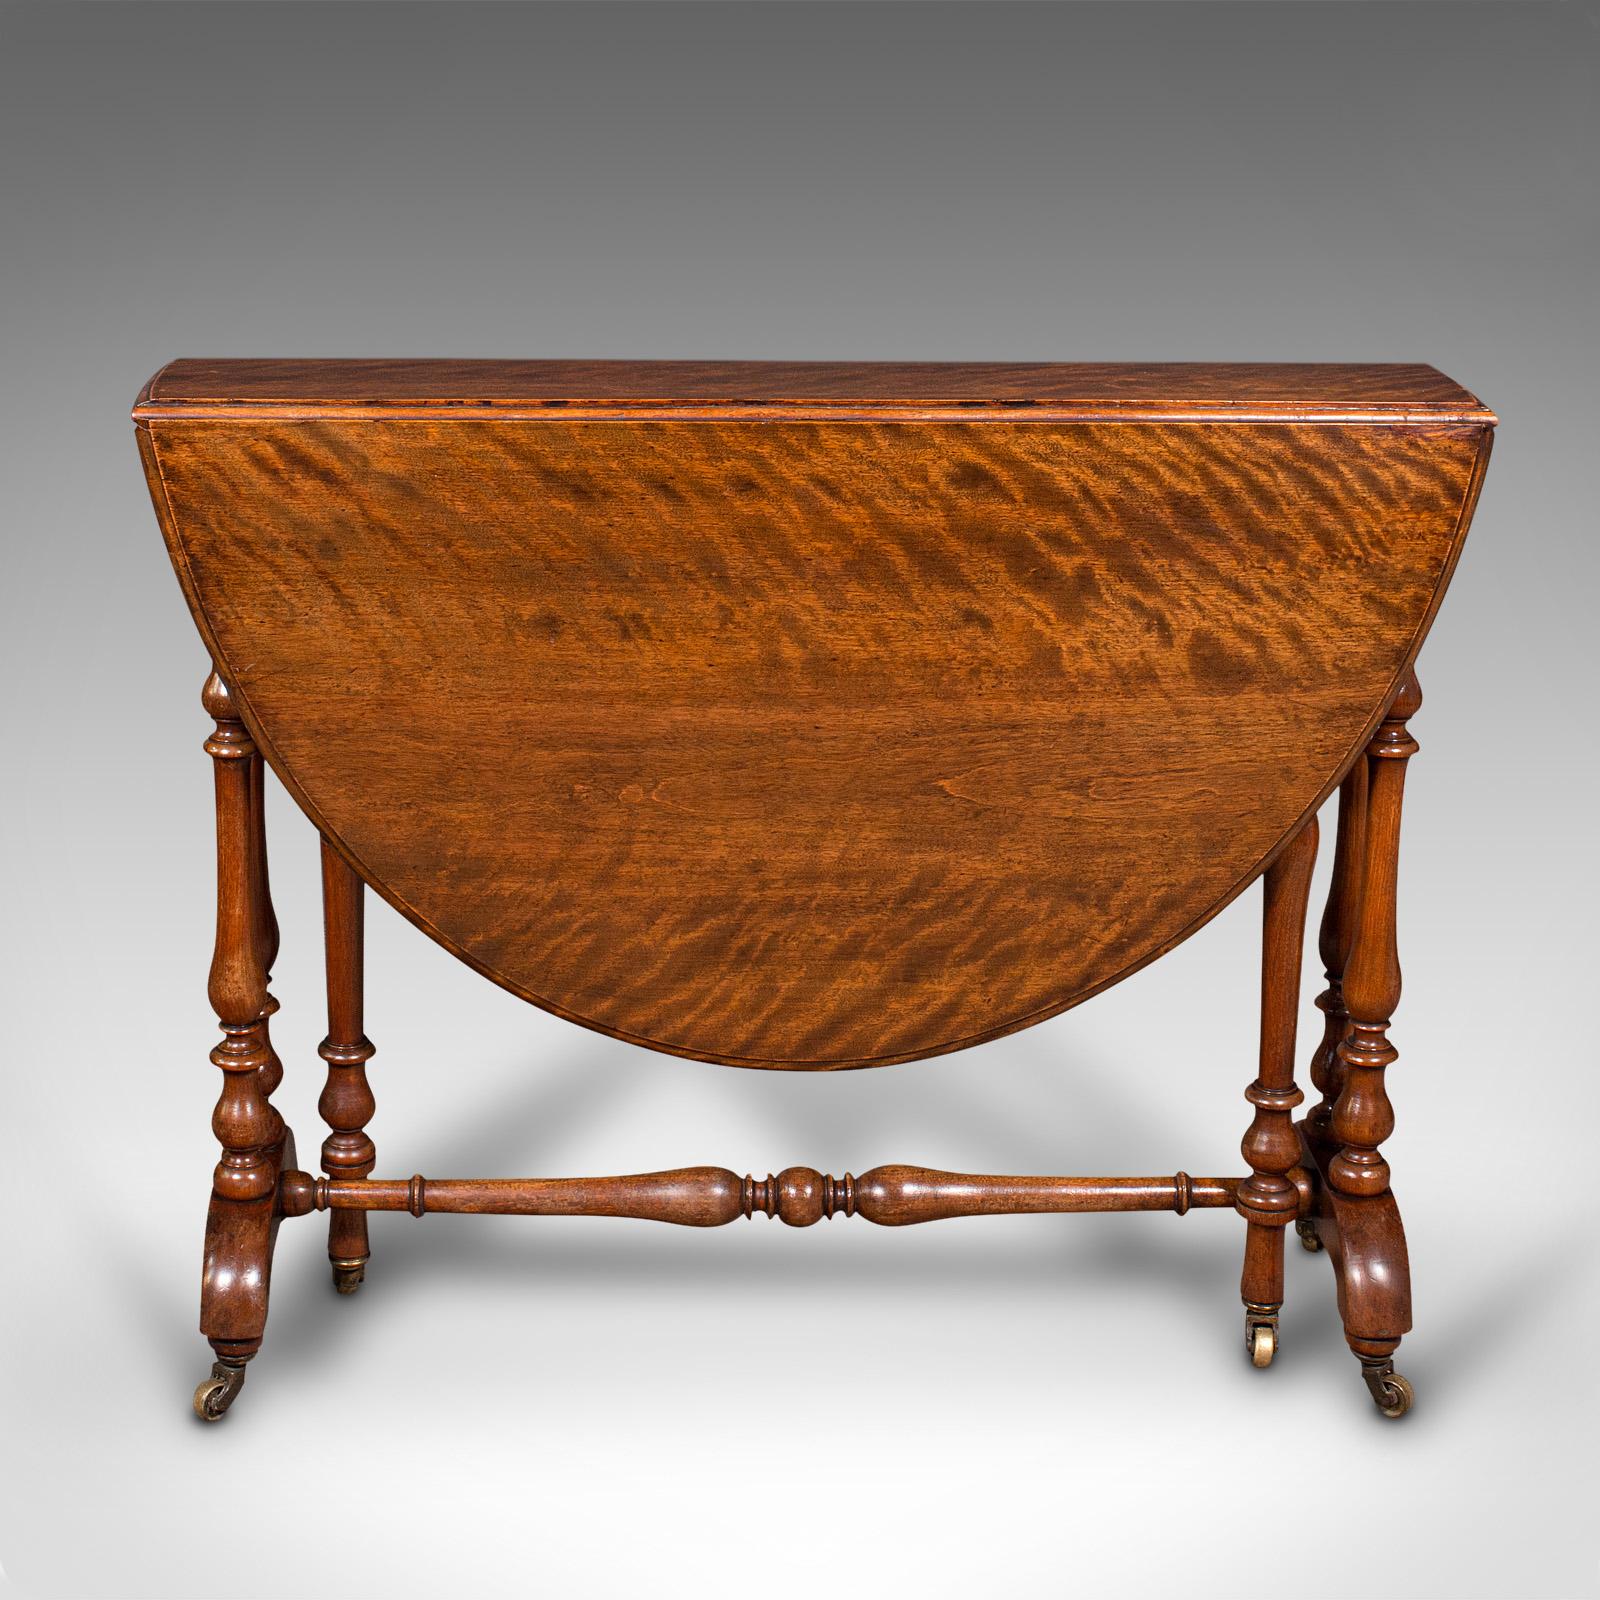 British Antique Oval Sutherland Table, English, Gate Leg, Occasional, Victorian, C.1850 For Sale